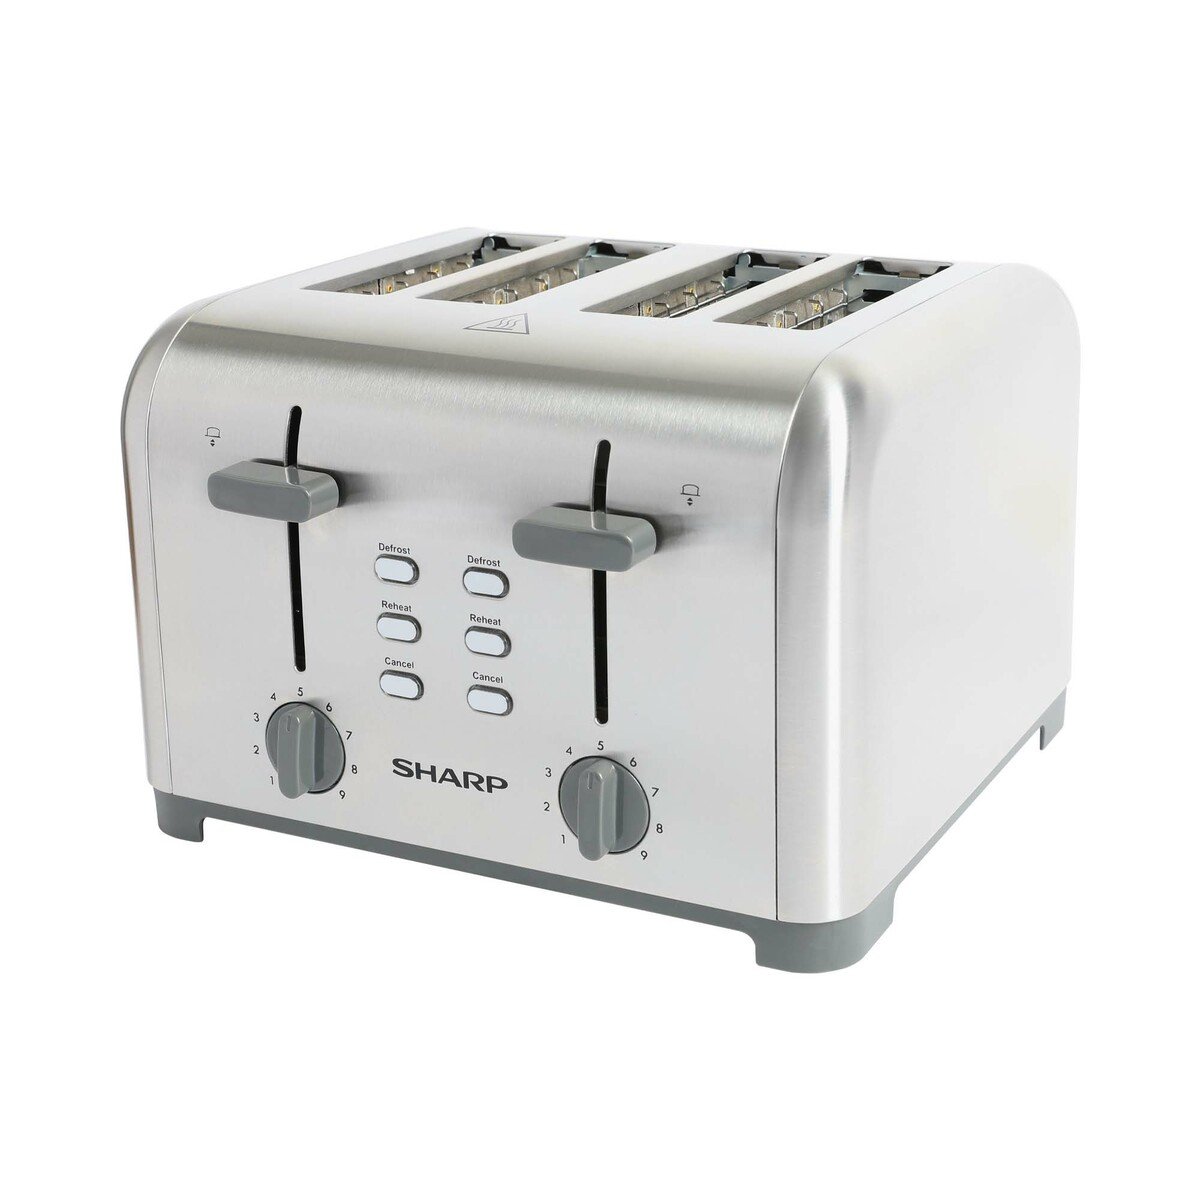 Sharp 4 Slice Stainless Steel Toaster With Crumb Tray Silver 1400W KZ-T42-S3